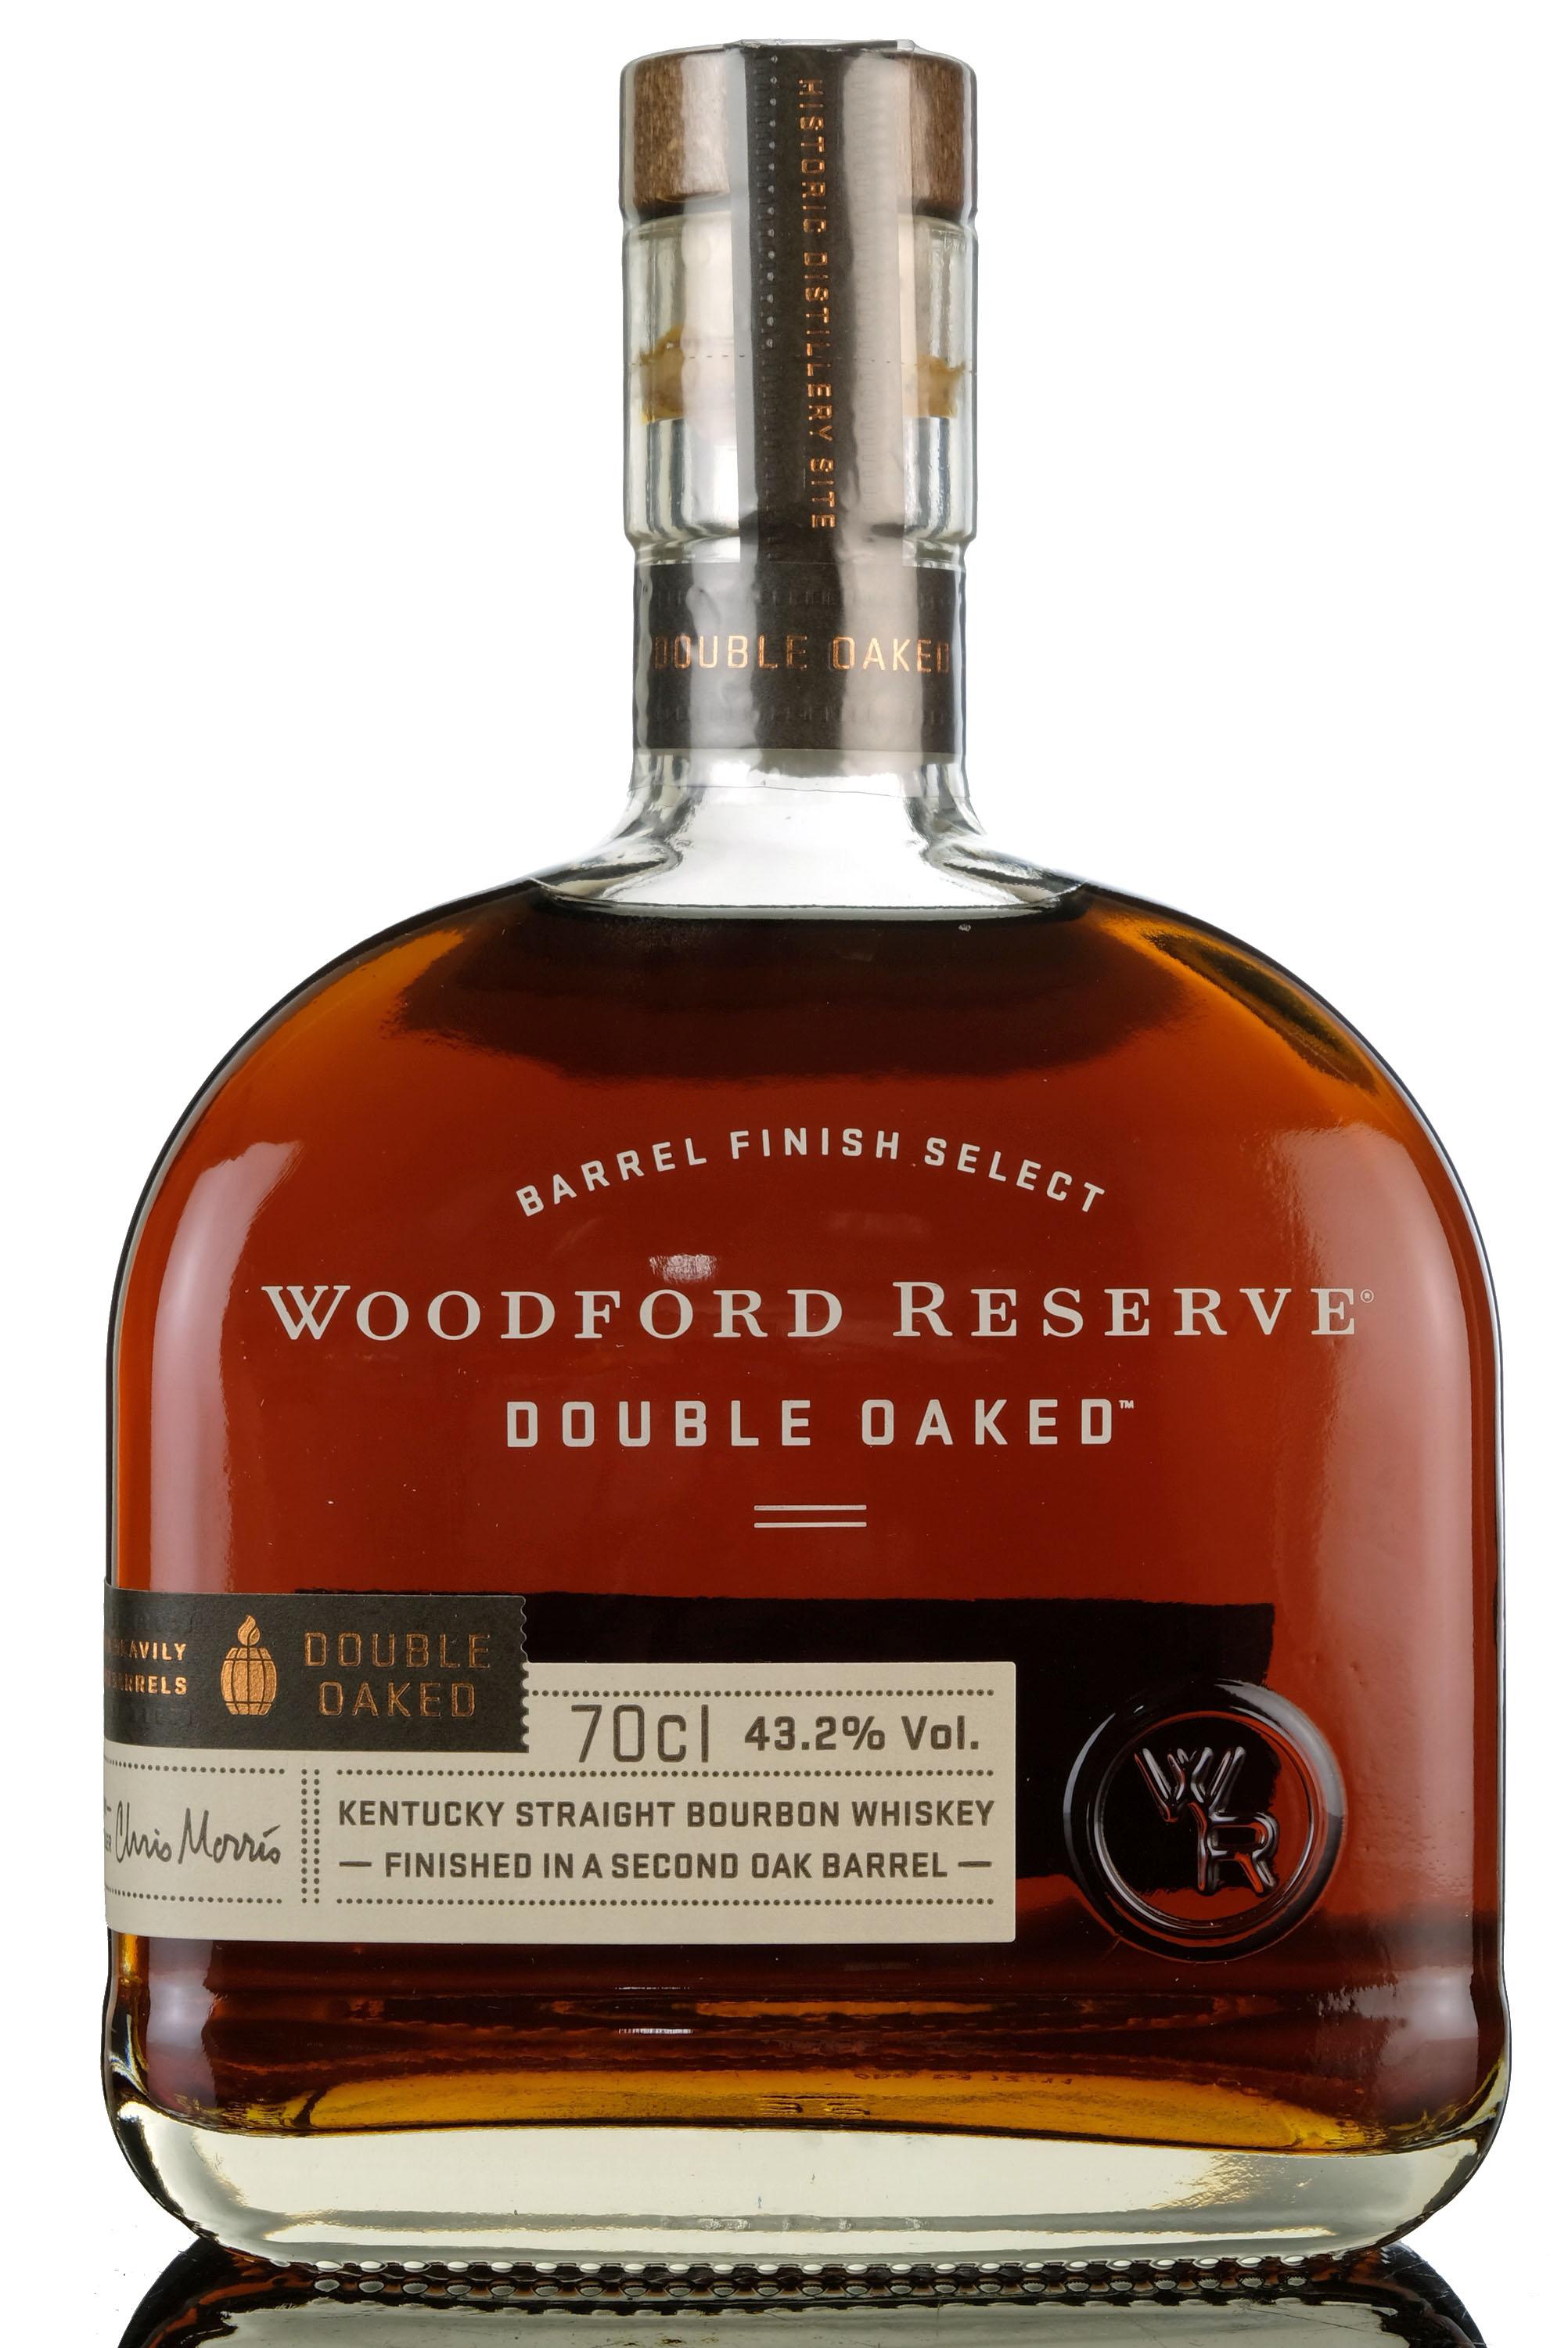 Woodford Reserve - Double Oaked - Kentucky Straight Bourbon Whiskey